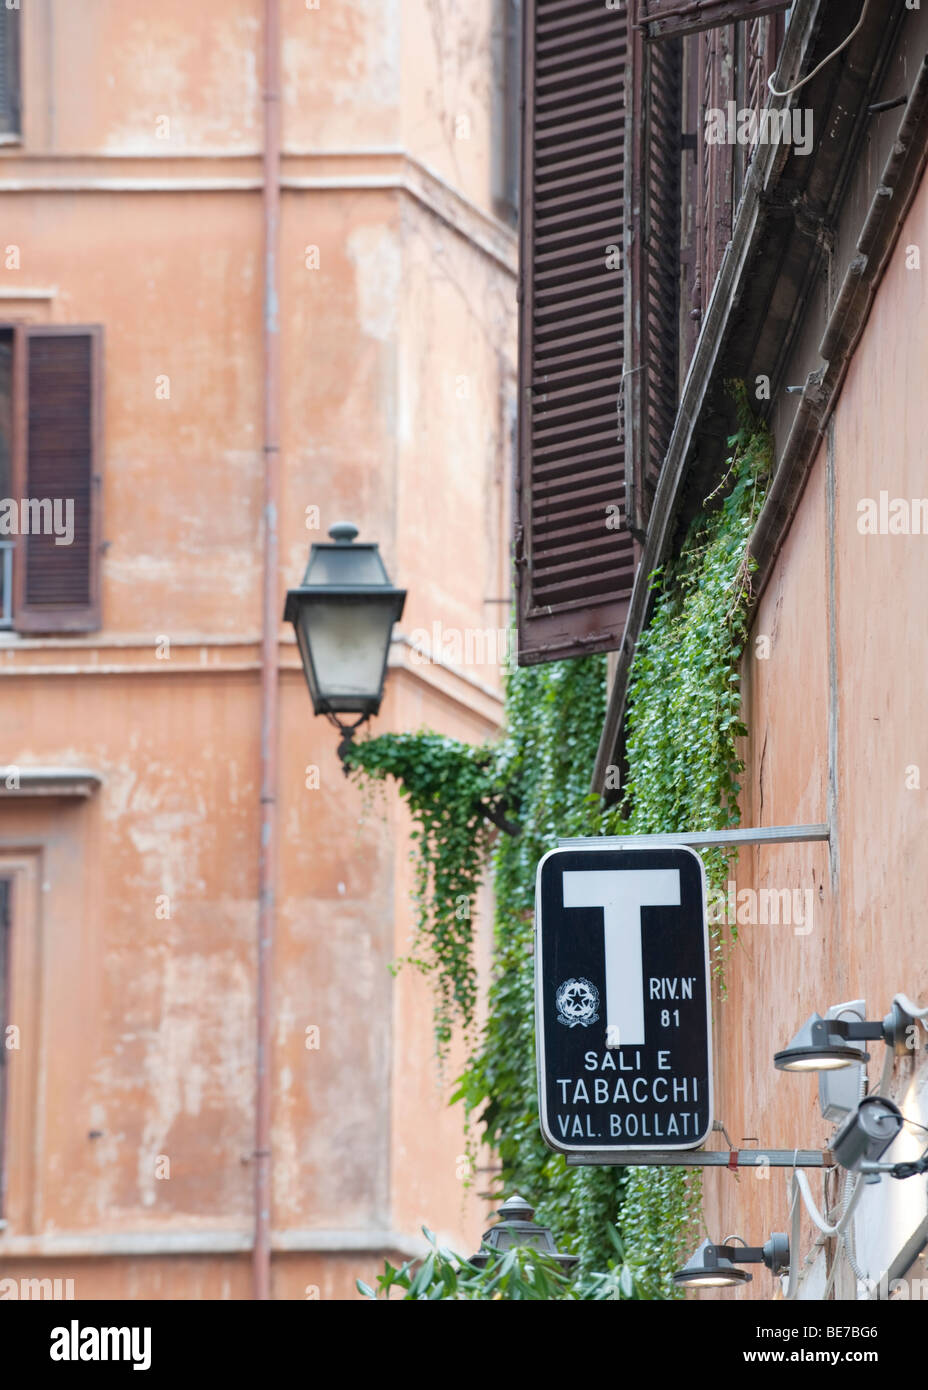 A traditional and typical 'Sali e tabacchi' (Salt and Tobacco) sign in Via Della Pace, Rome, Italy Stock Photo